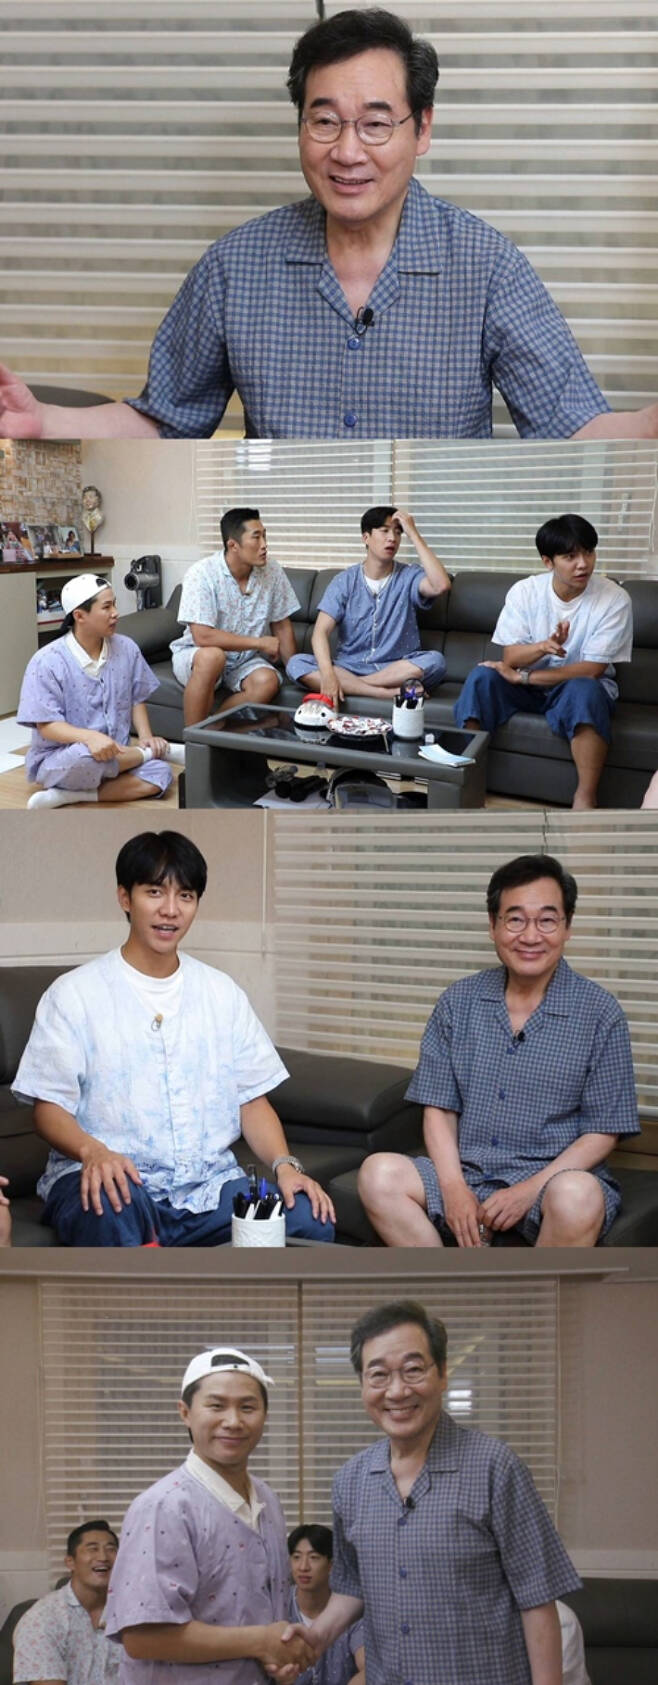 Lee Nak-yeon, former Democratic Party leader, is the last master of SBS entertainment All The Butlers presidential candidate Big 3 special feature.Lee Nak-yeon, who appears on All The Butlers on the 3rd, will be Confessions about the gossip surrounding him as well as the past that has not been released anywhere.Master Lee Nak-yeon vowed to be frankly Confessions, saying, Ill just get it before the start of the All The Butlers hearing.The members questioned the resignation of the masters resignation and the heart of the approval rating, and focused on the real heart of Master Lee Nak-yeon, who had not been disclosed anywhere.Master Lee Nak-yeon surprised everyone in the field by telling the story of his past experiences such as the story of studying in Gwangju, which started from the middle school days, which is the reality of the movie parasiteThe All The Butlers Hearing scene of Lee Nak-yeon, who has been honest about his life history since his uncompromising talks about rivals Yoon Seok-yeol and Lee Jae-myung, can be seen at SBS All The Butlers broadcasted at 6:25 on the 3rd.